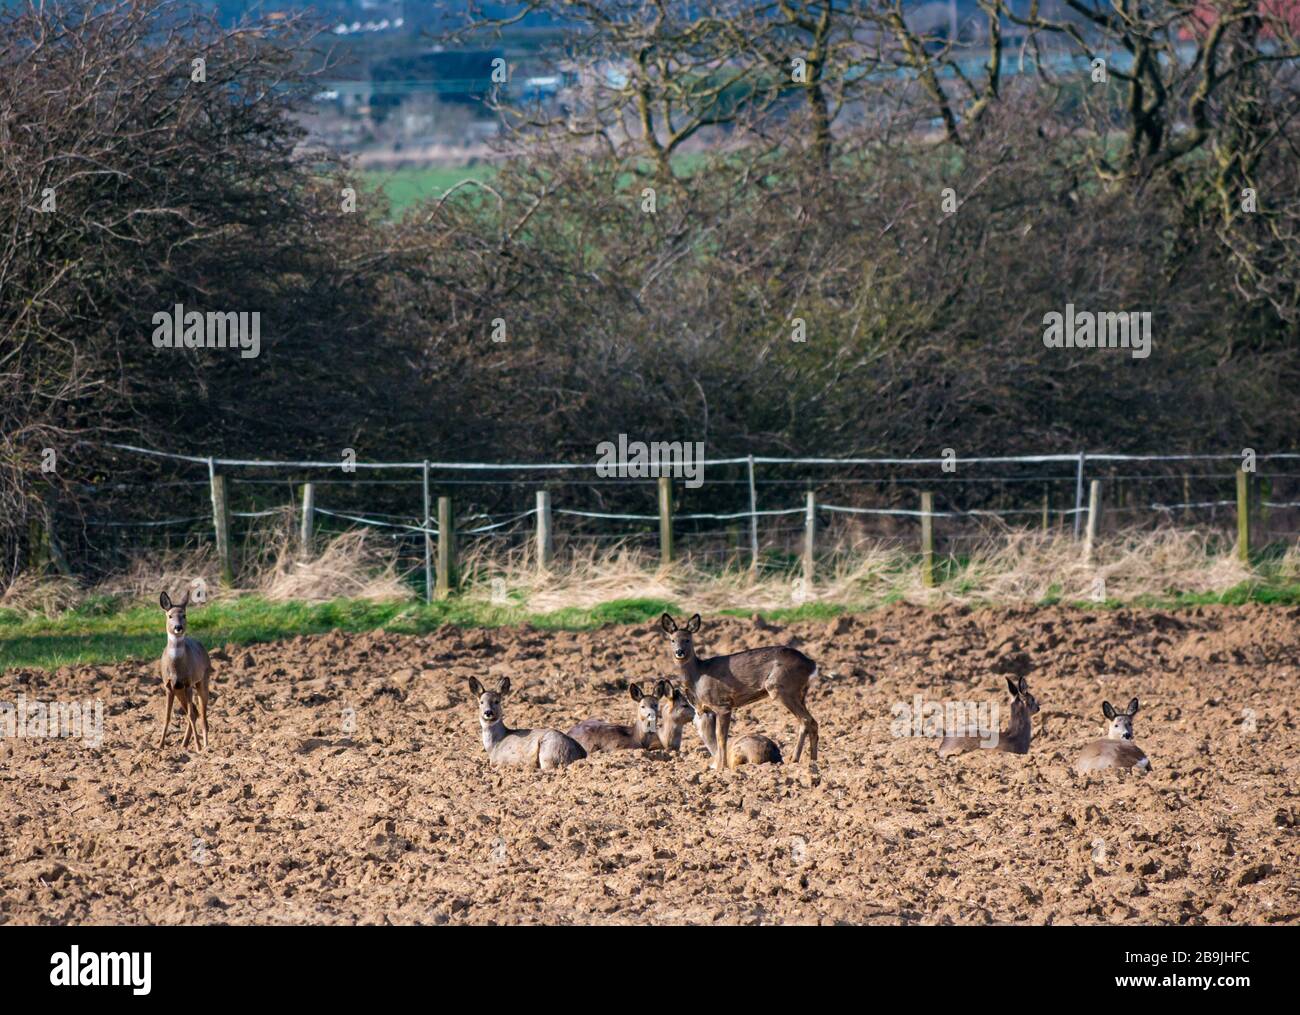 East Lothian, Scotland, United Kingdom. 24th March 2020. A herd of roe deer are well camouflaged lying in a freshly ploughed field and are alert to potential danger Stock Photo